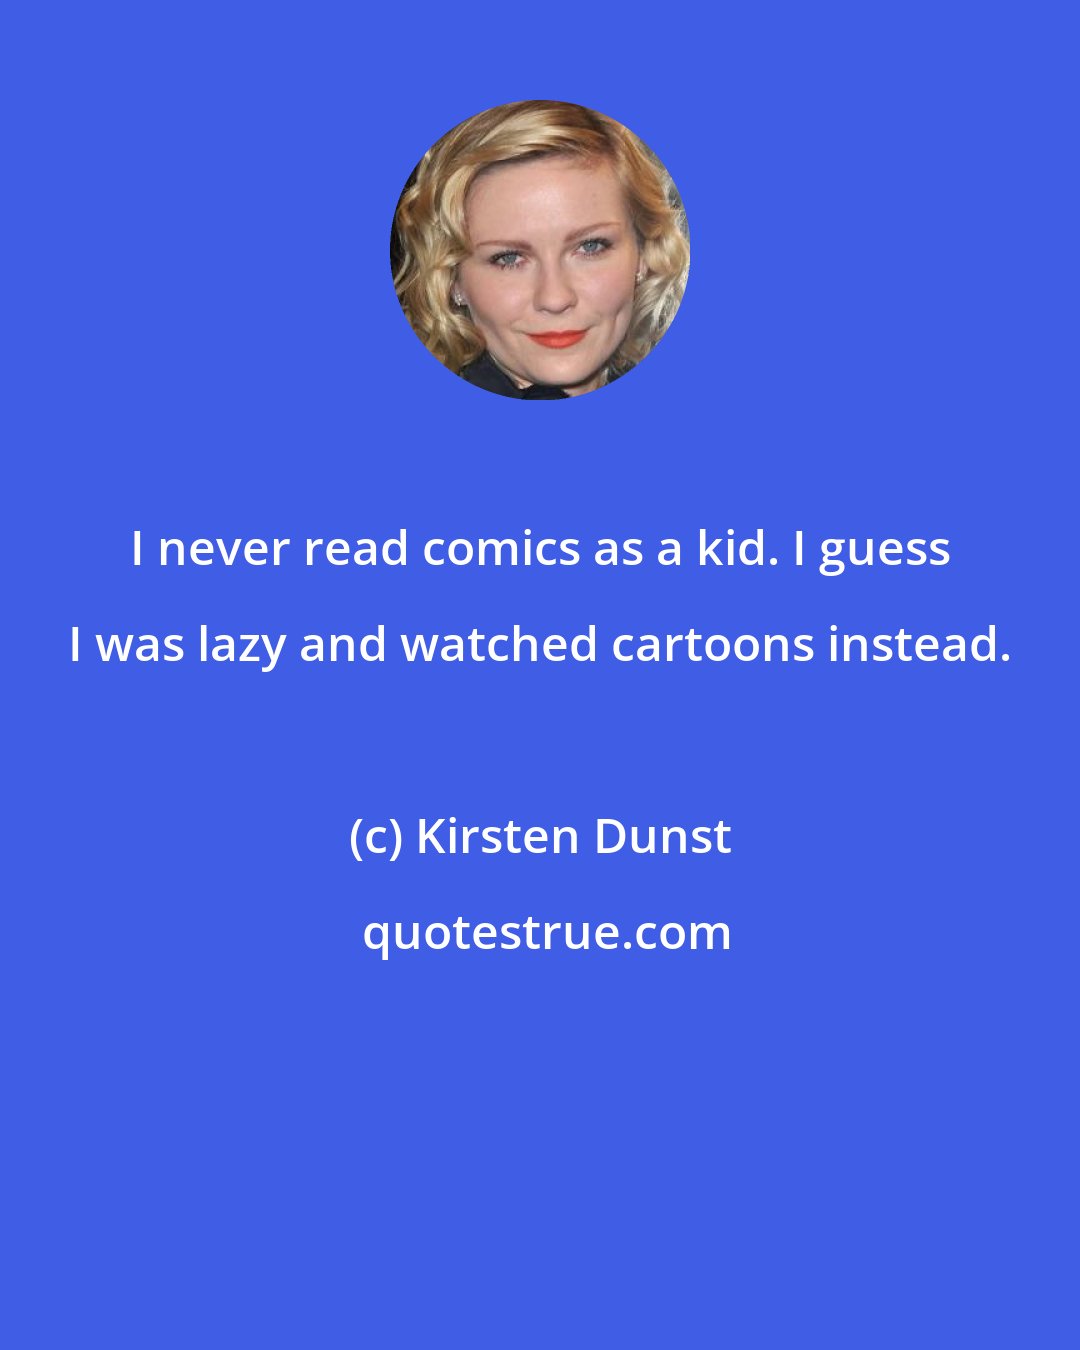 Kirsten Dunst: I never read comics as a kid. I guess I was lazy and watched cartoons instead.